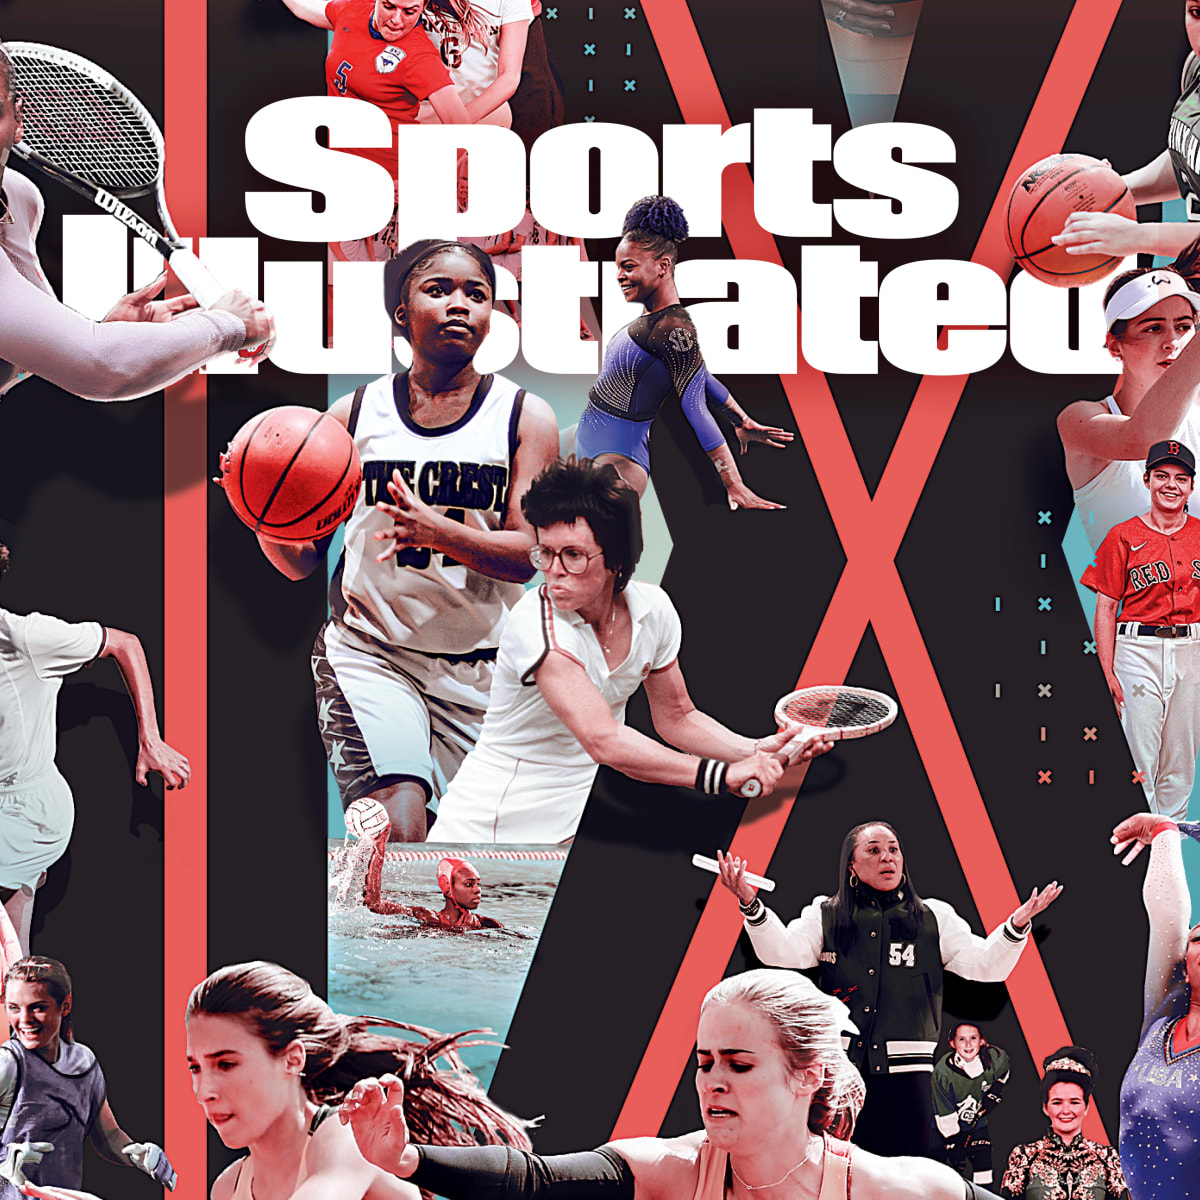 Title IX 50th anniversary: How one law changed women's sports